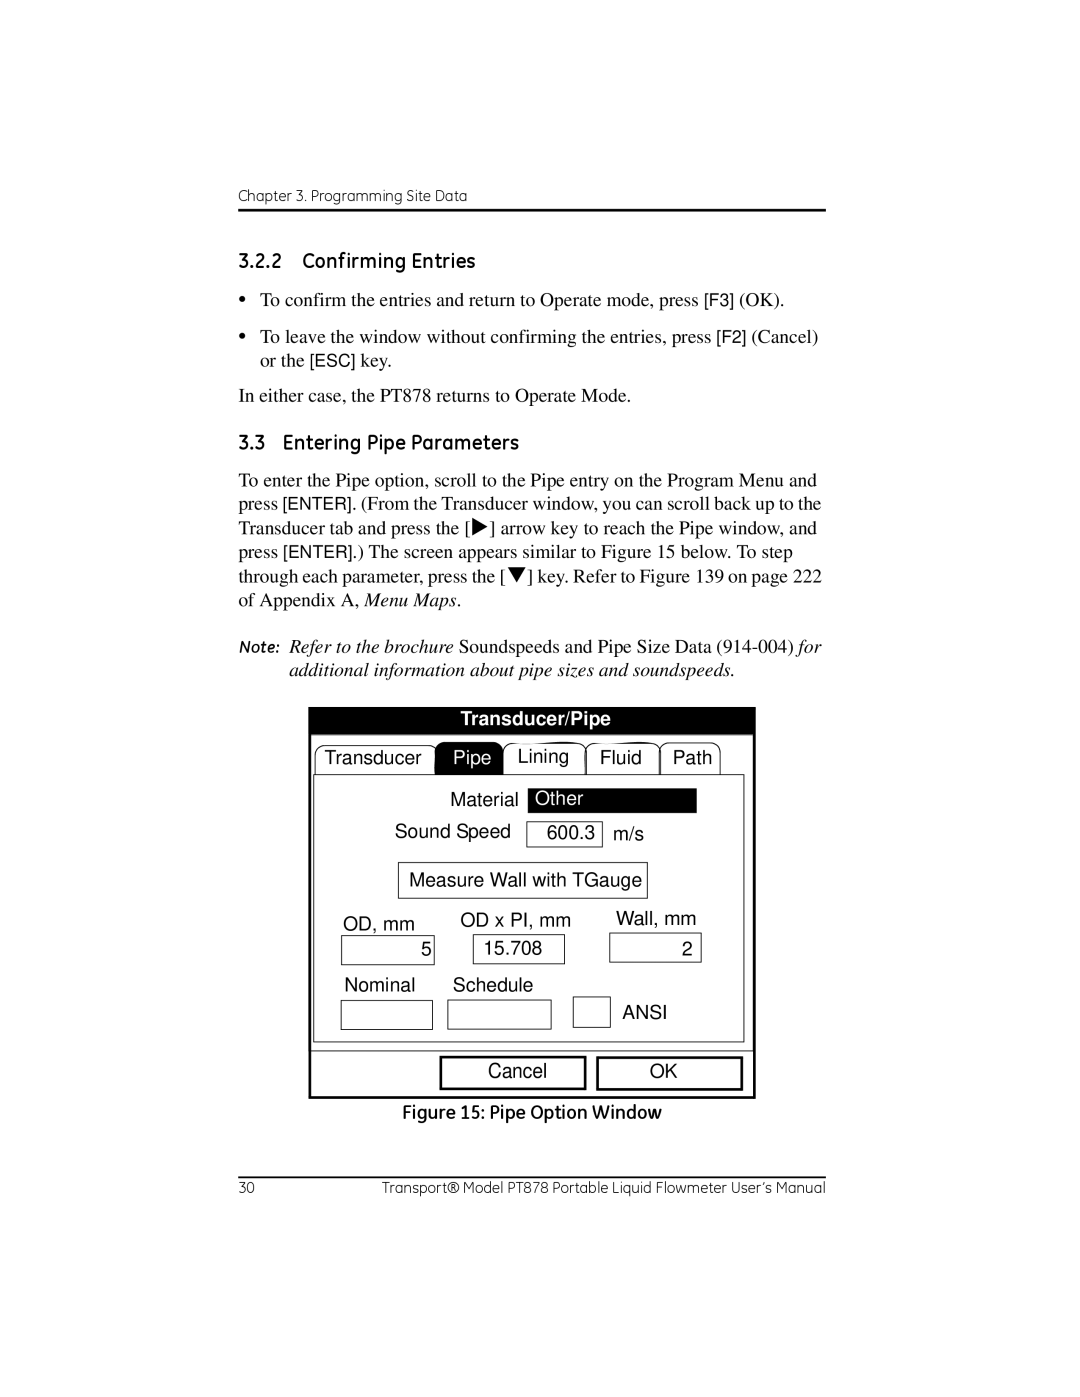 GE PT878 user manual Confirming Entries, Entering Pipe Parameters, Other 